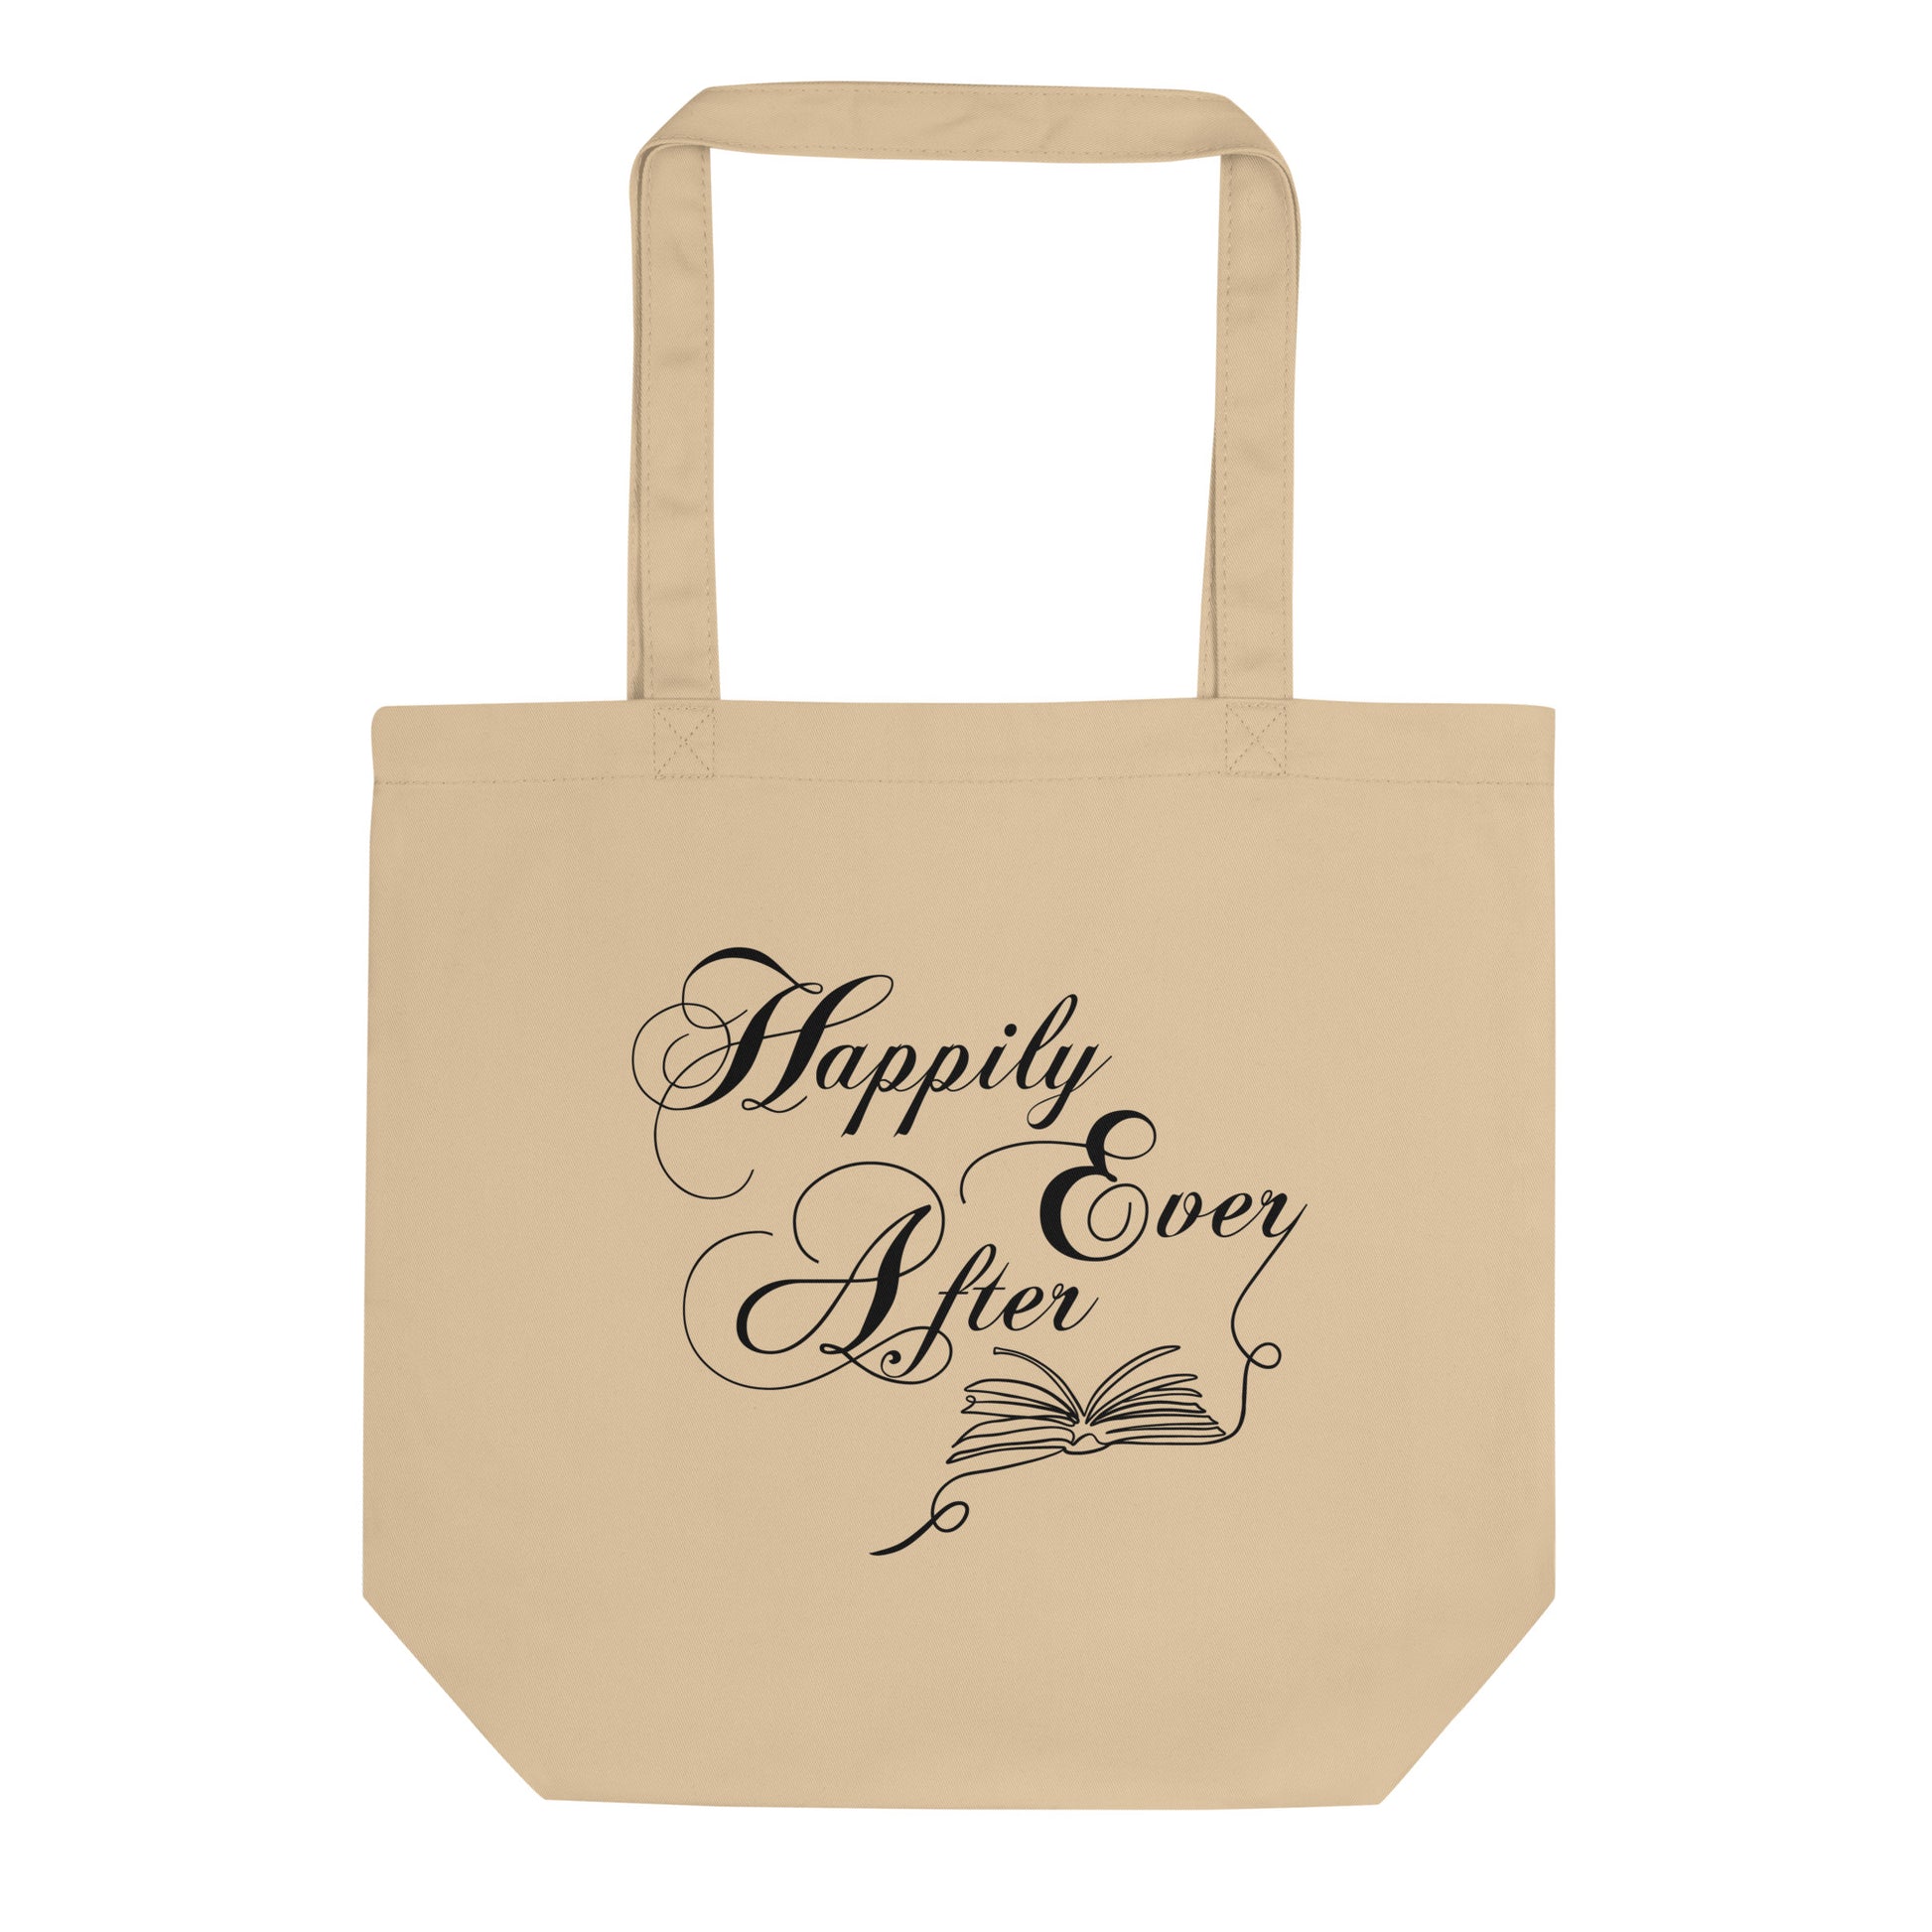 Happily Ever After HEA Book Trope tote bag